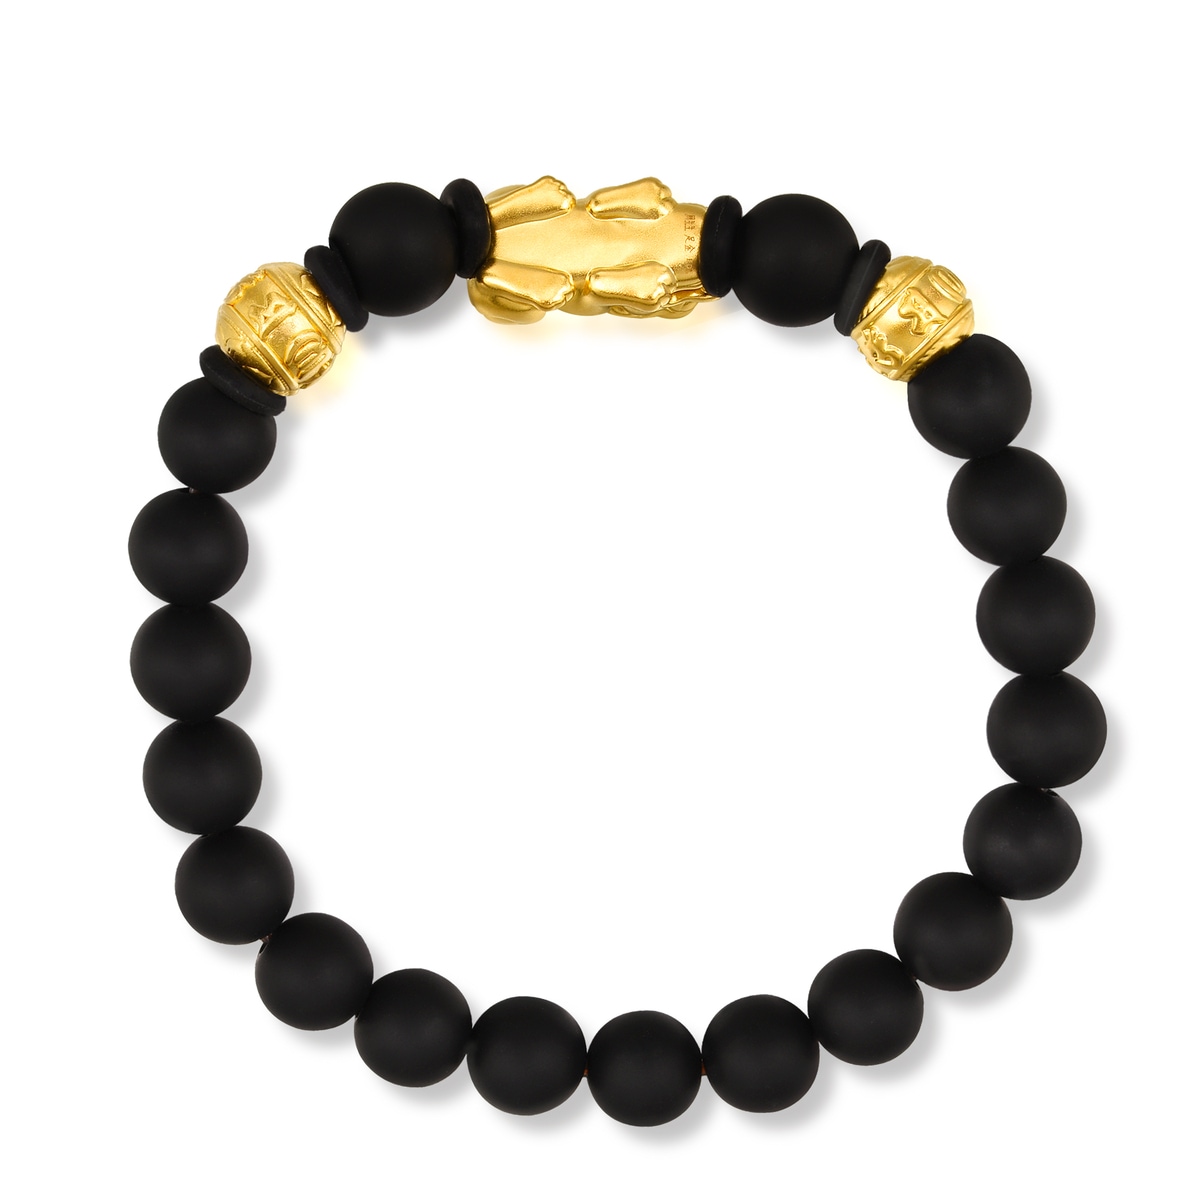 Cultural Blessings 999 Gold Bracelet - 91024B | Chow Sang Sang Jewellery